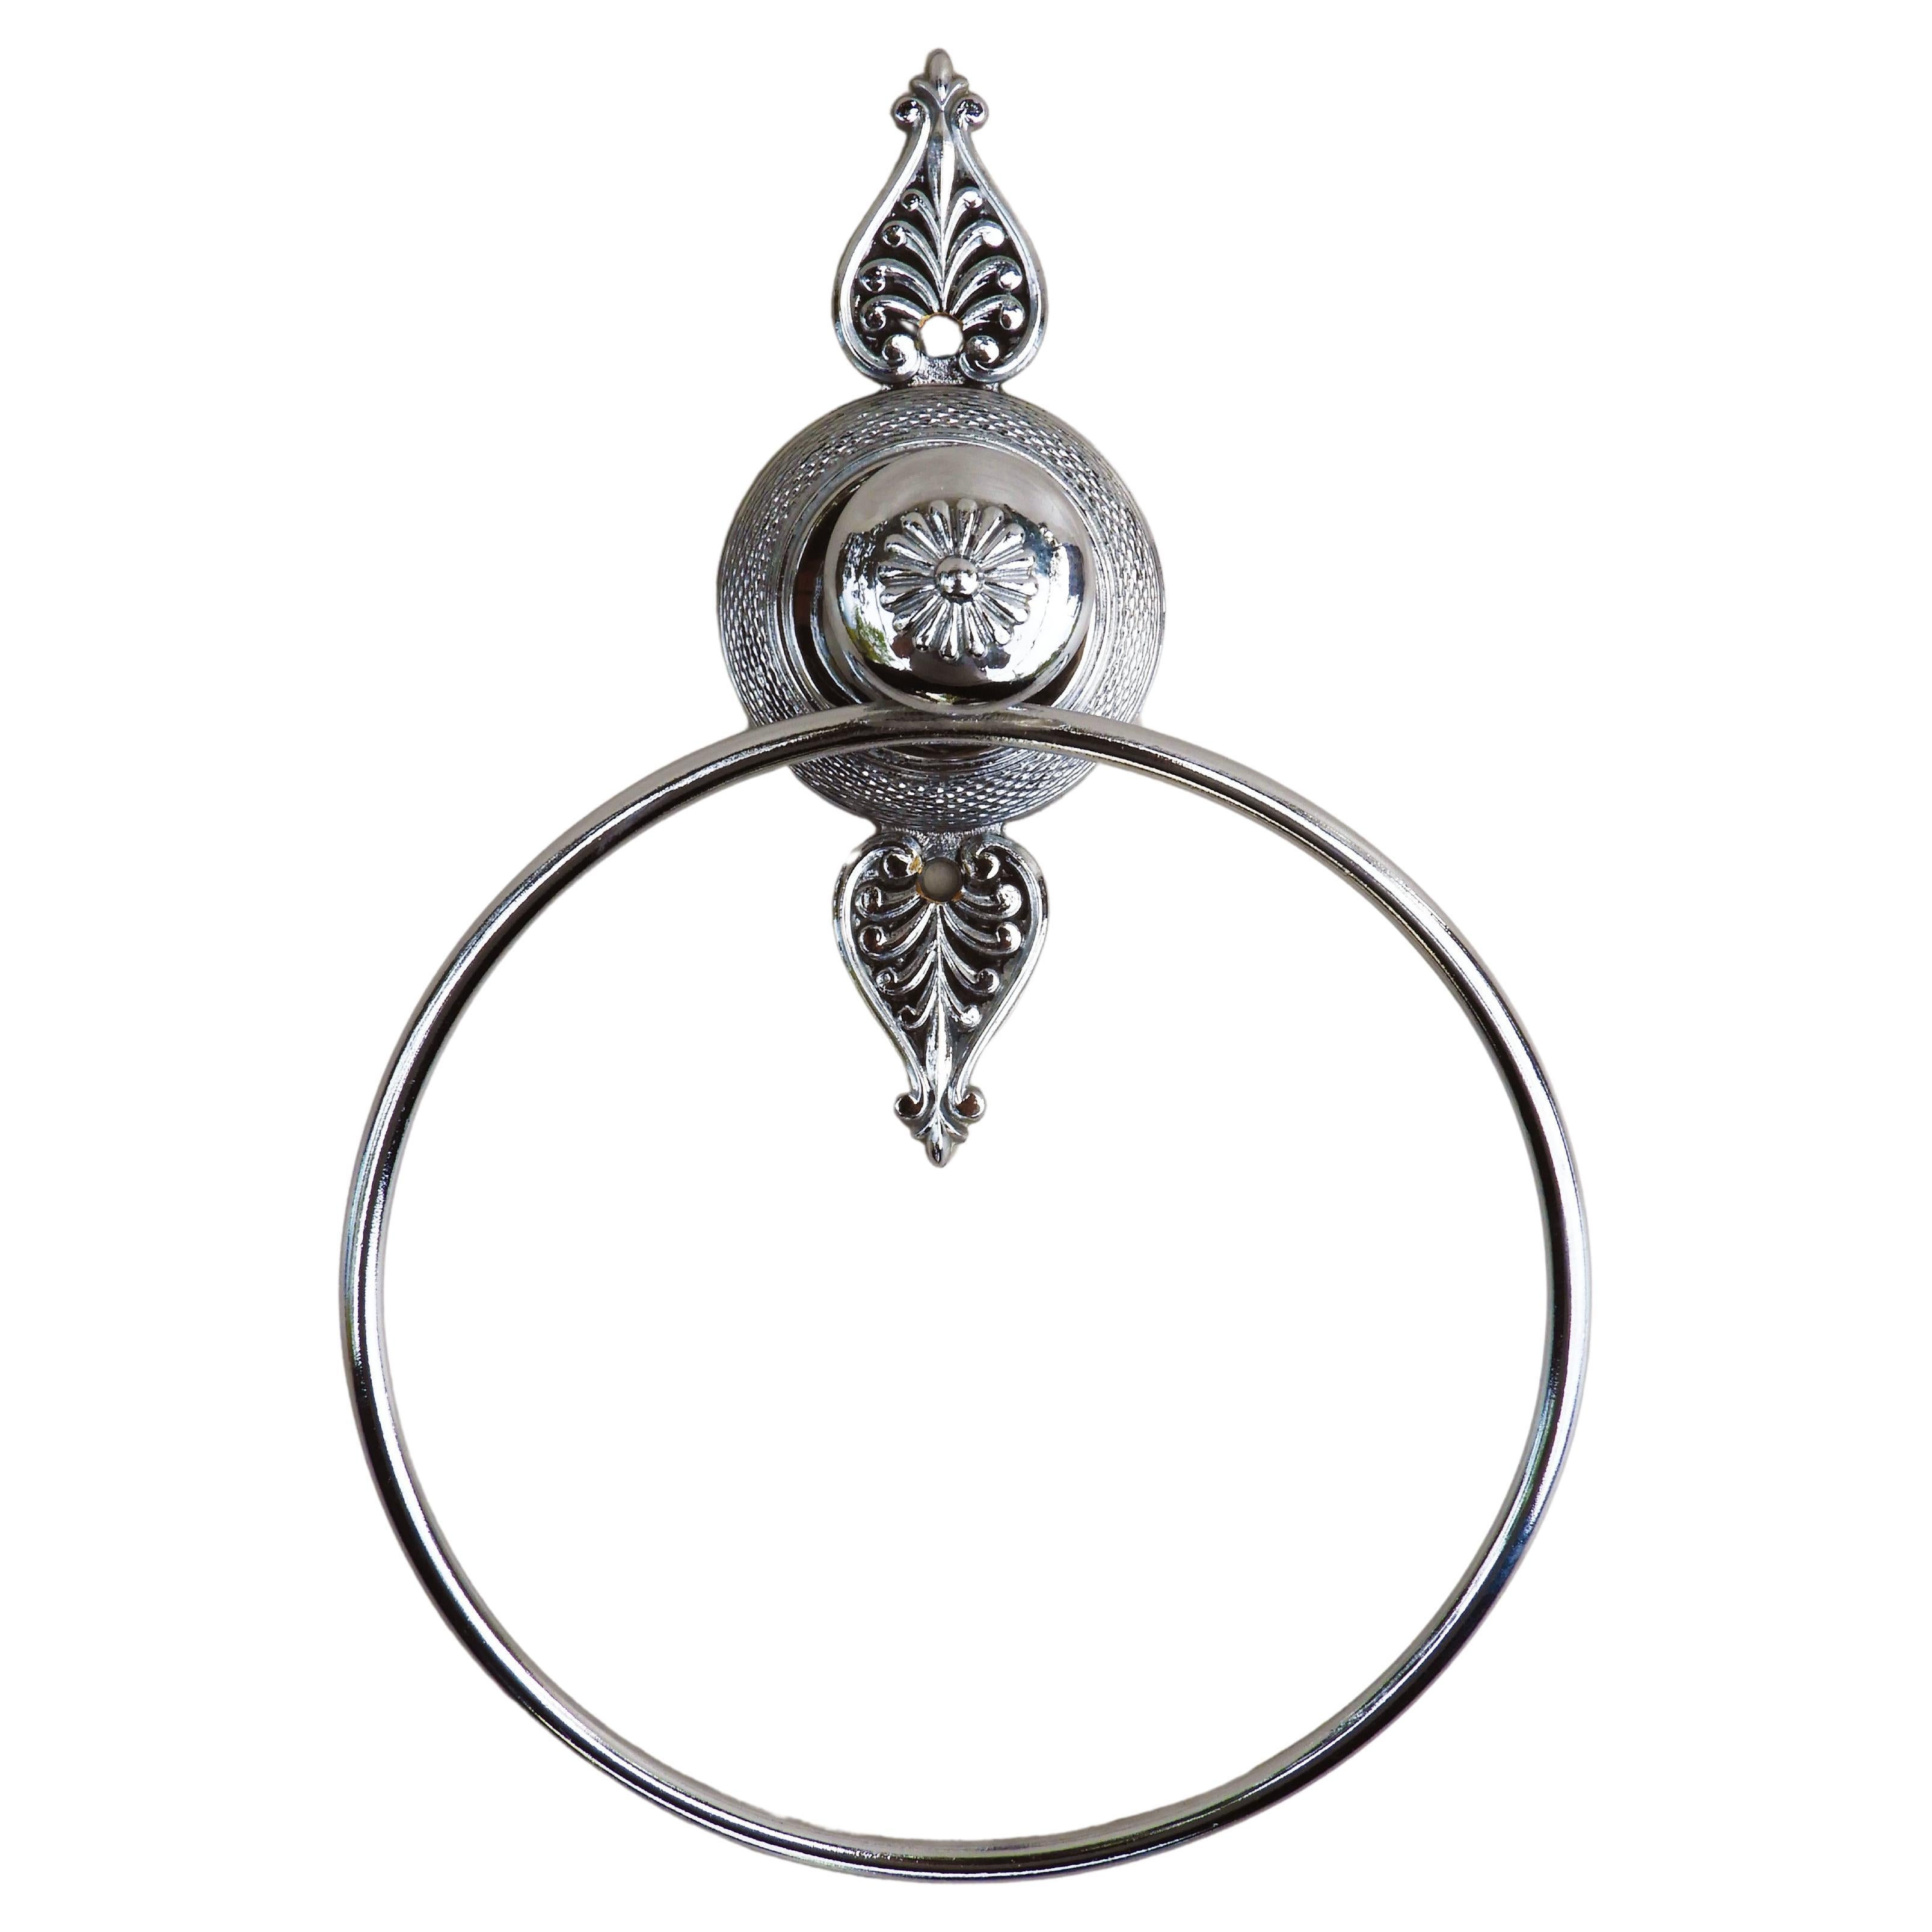 French Empire Revival Style Chrome Towel Ring For Sale